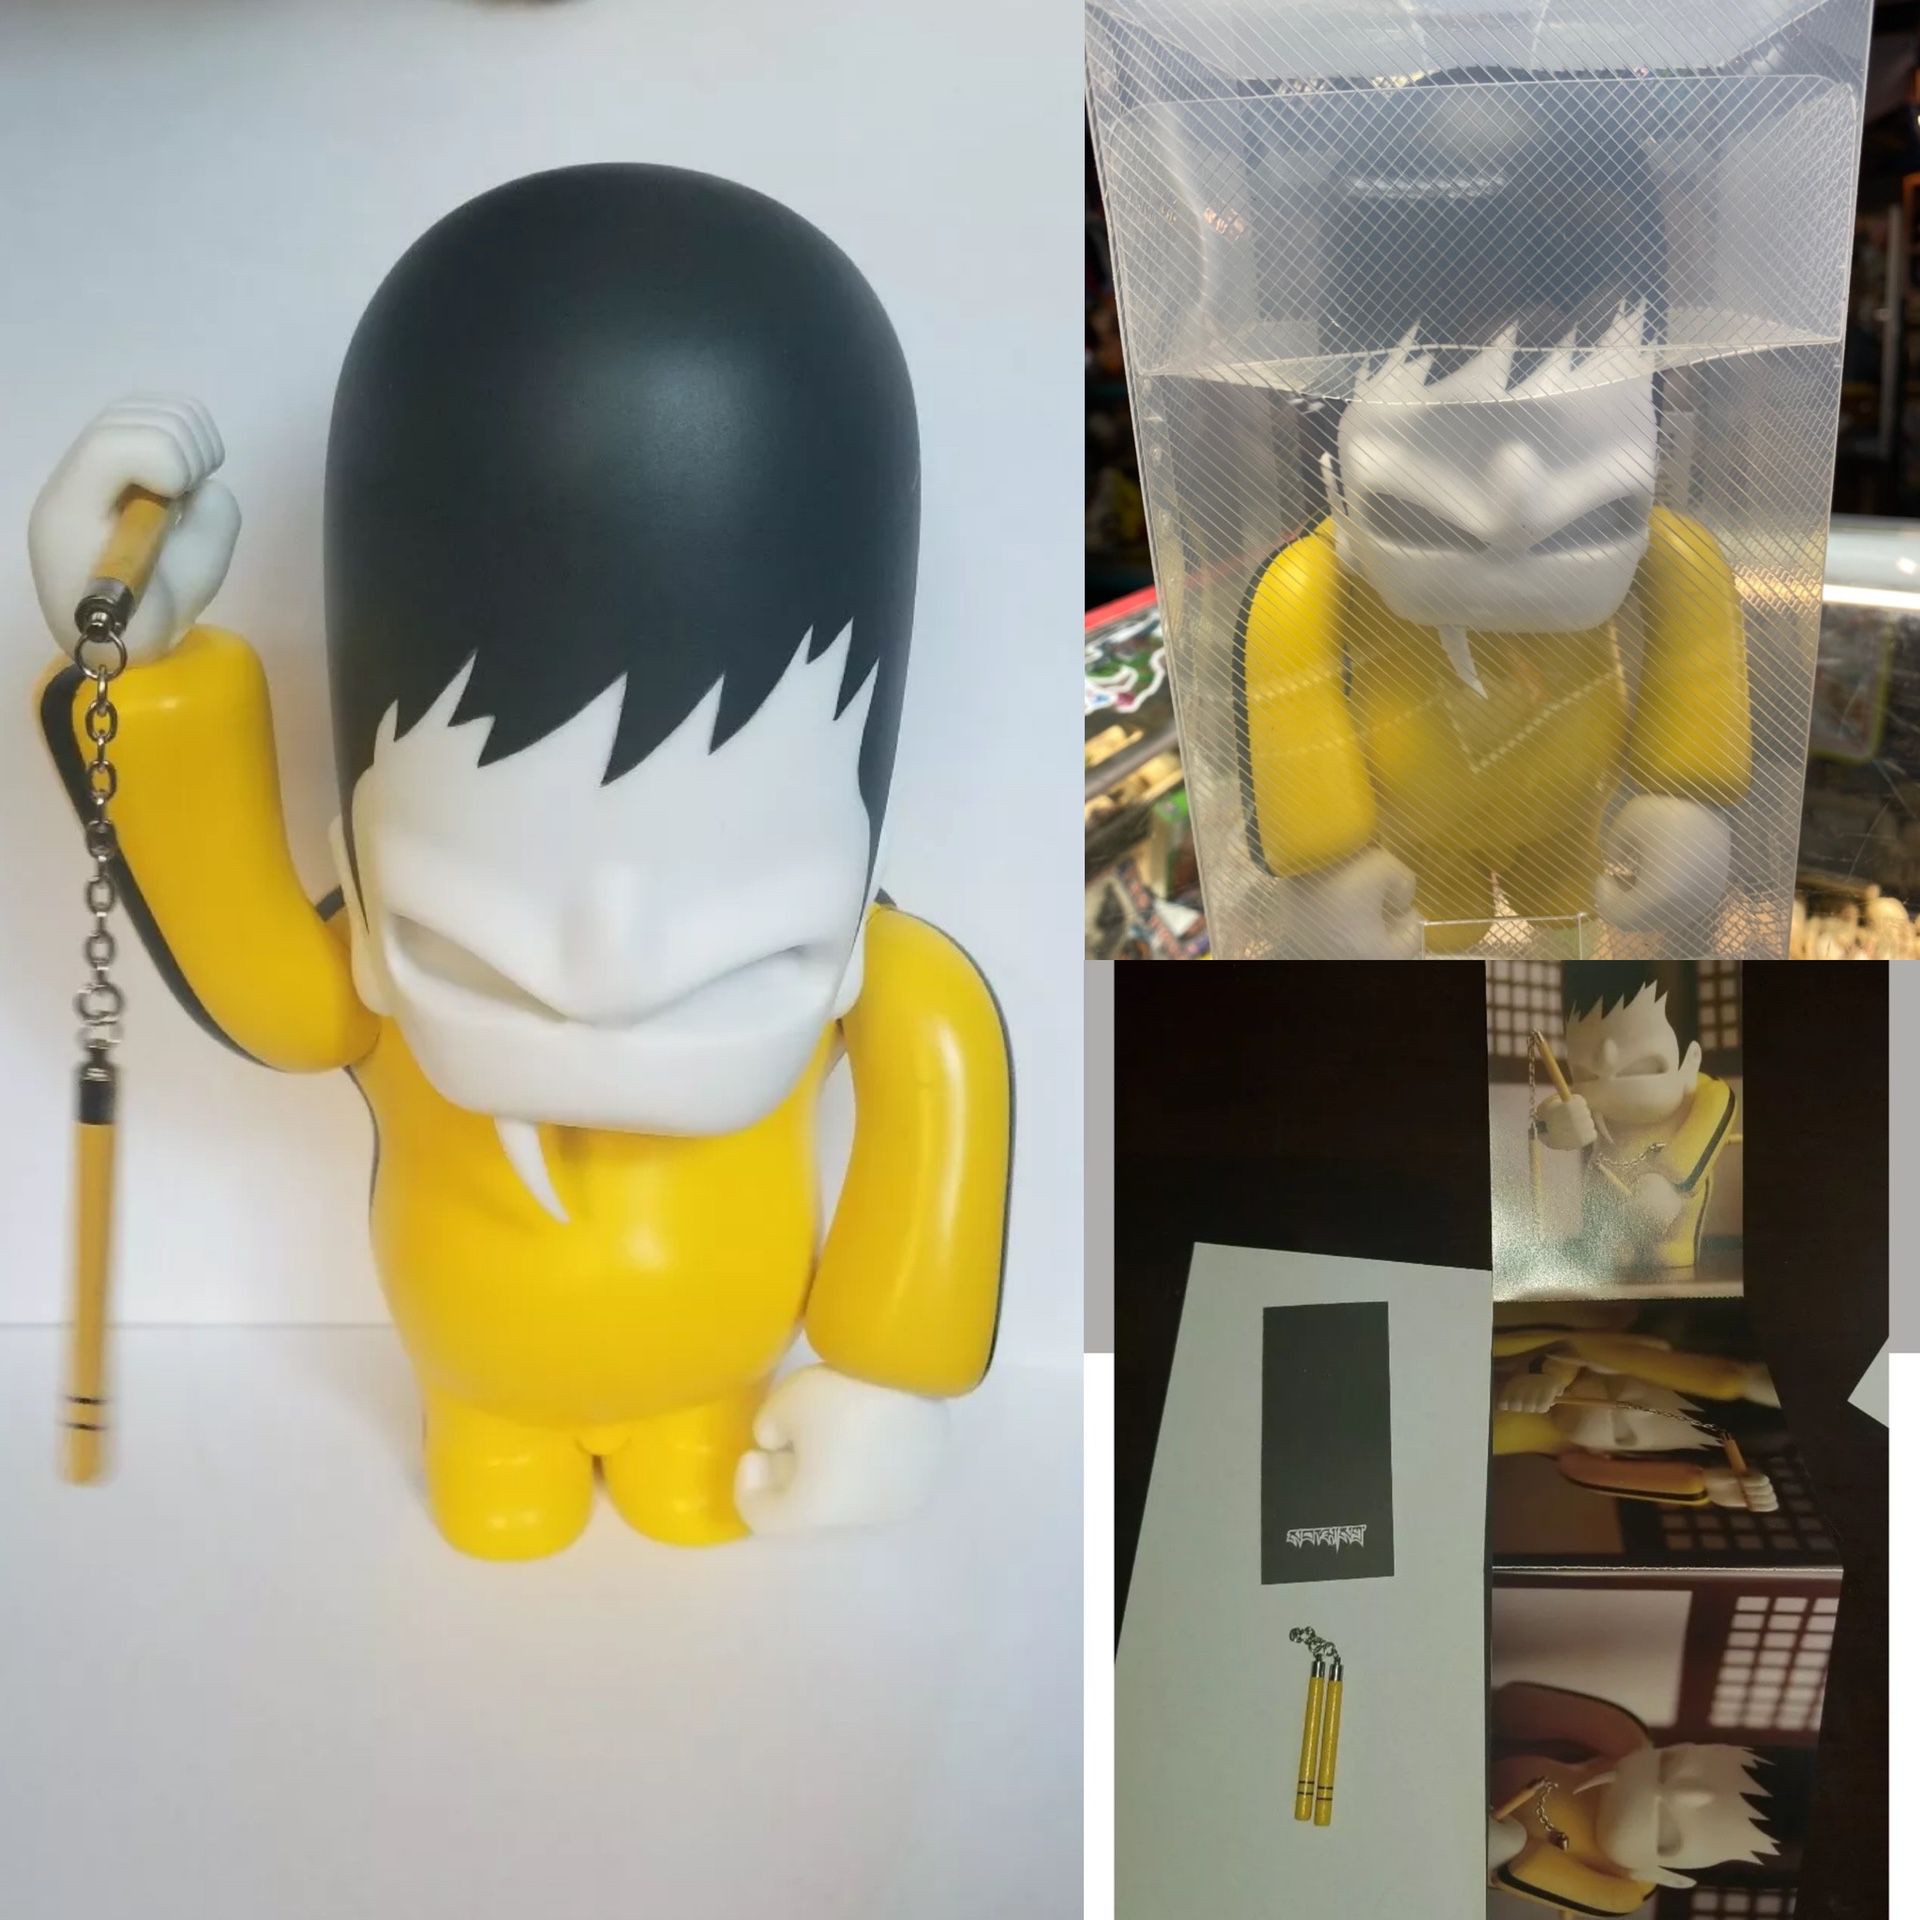 Rare Bruce Lee 7.5” Sofubi Vinyl Figure by Nothing Studio Toys Mint Complete in Box